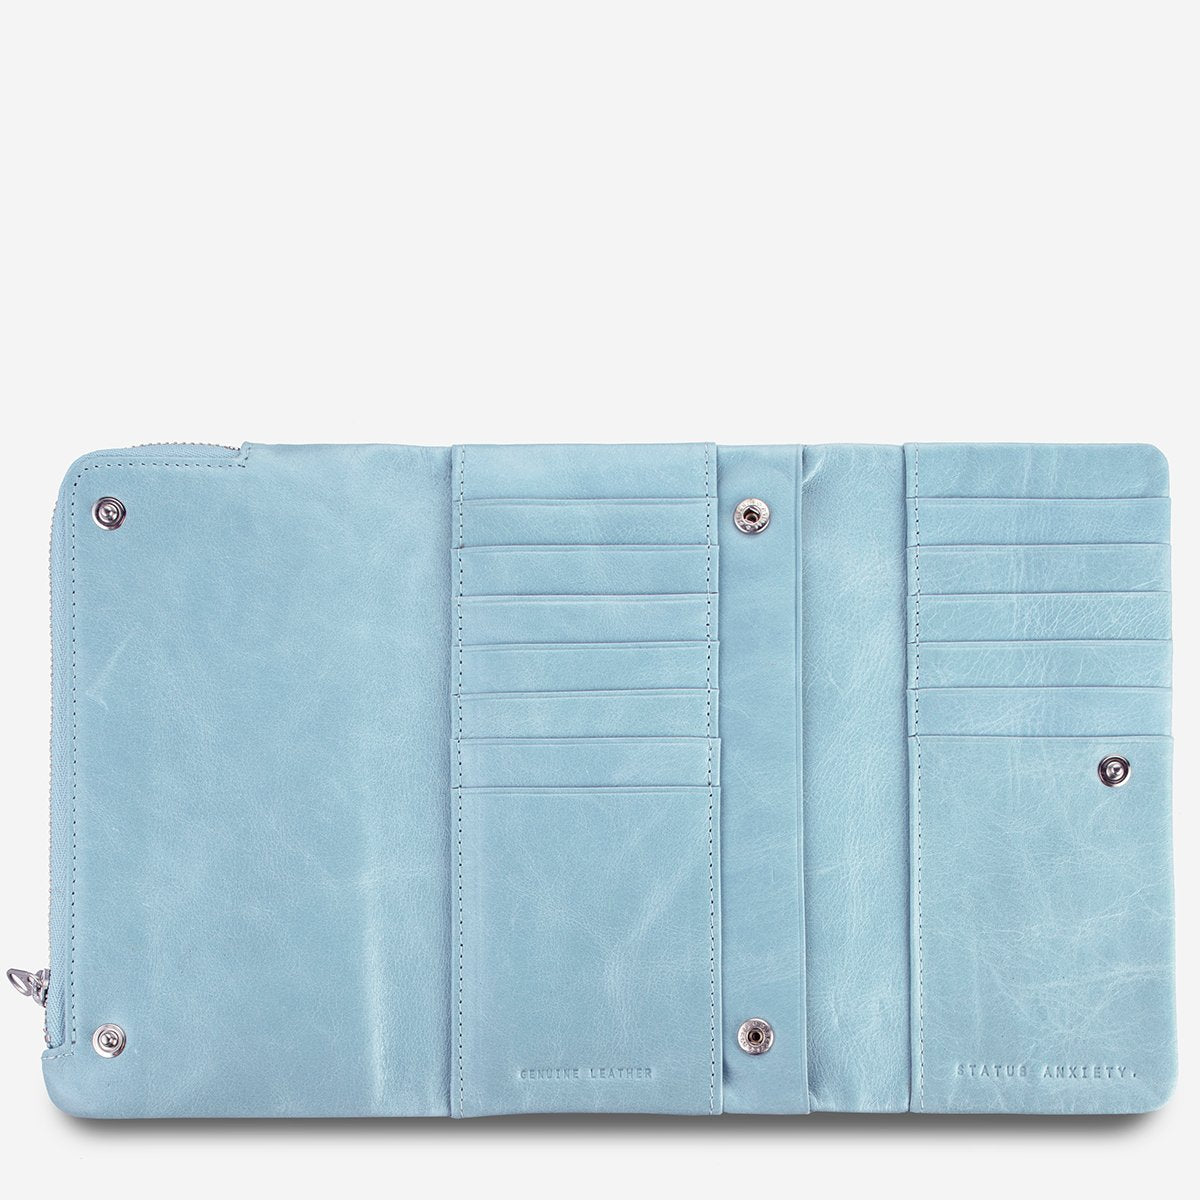 Status Anxiety Audrey Wallet in Sky opened